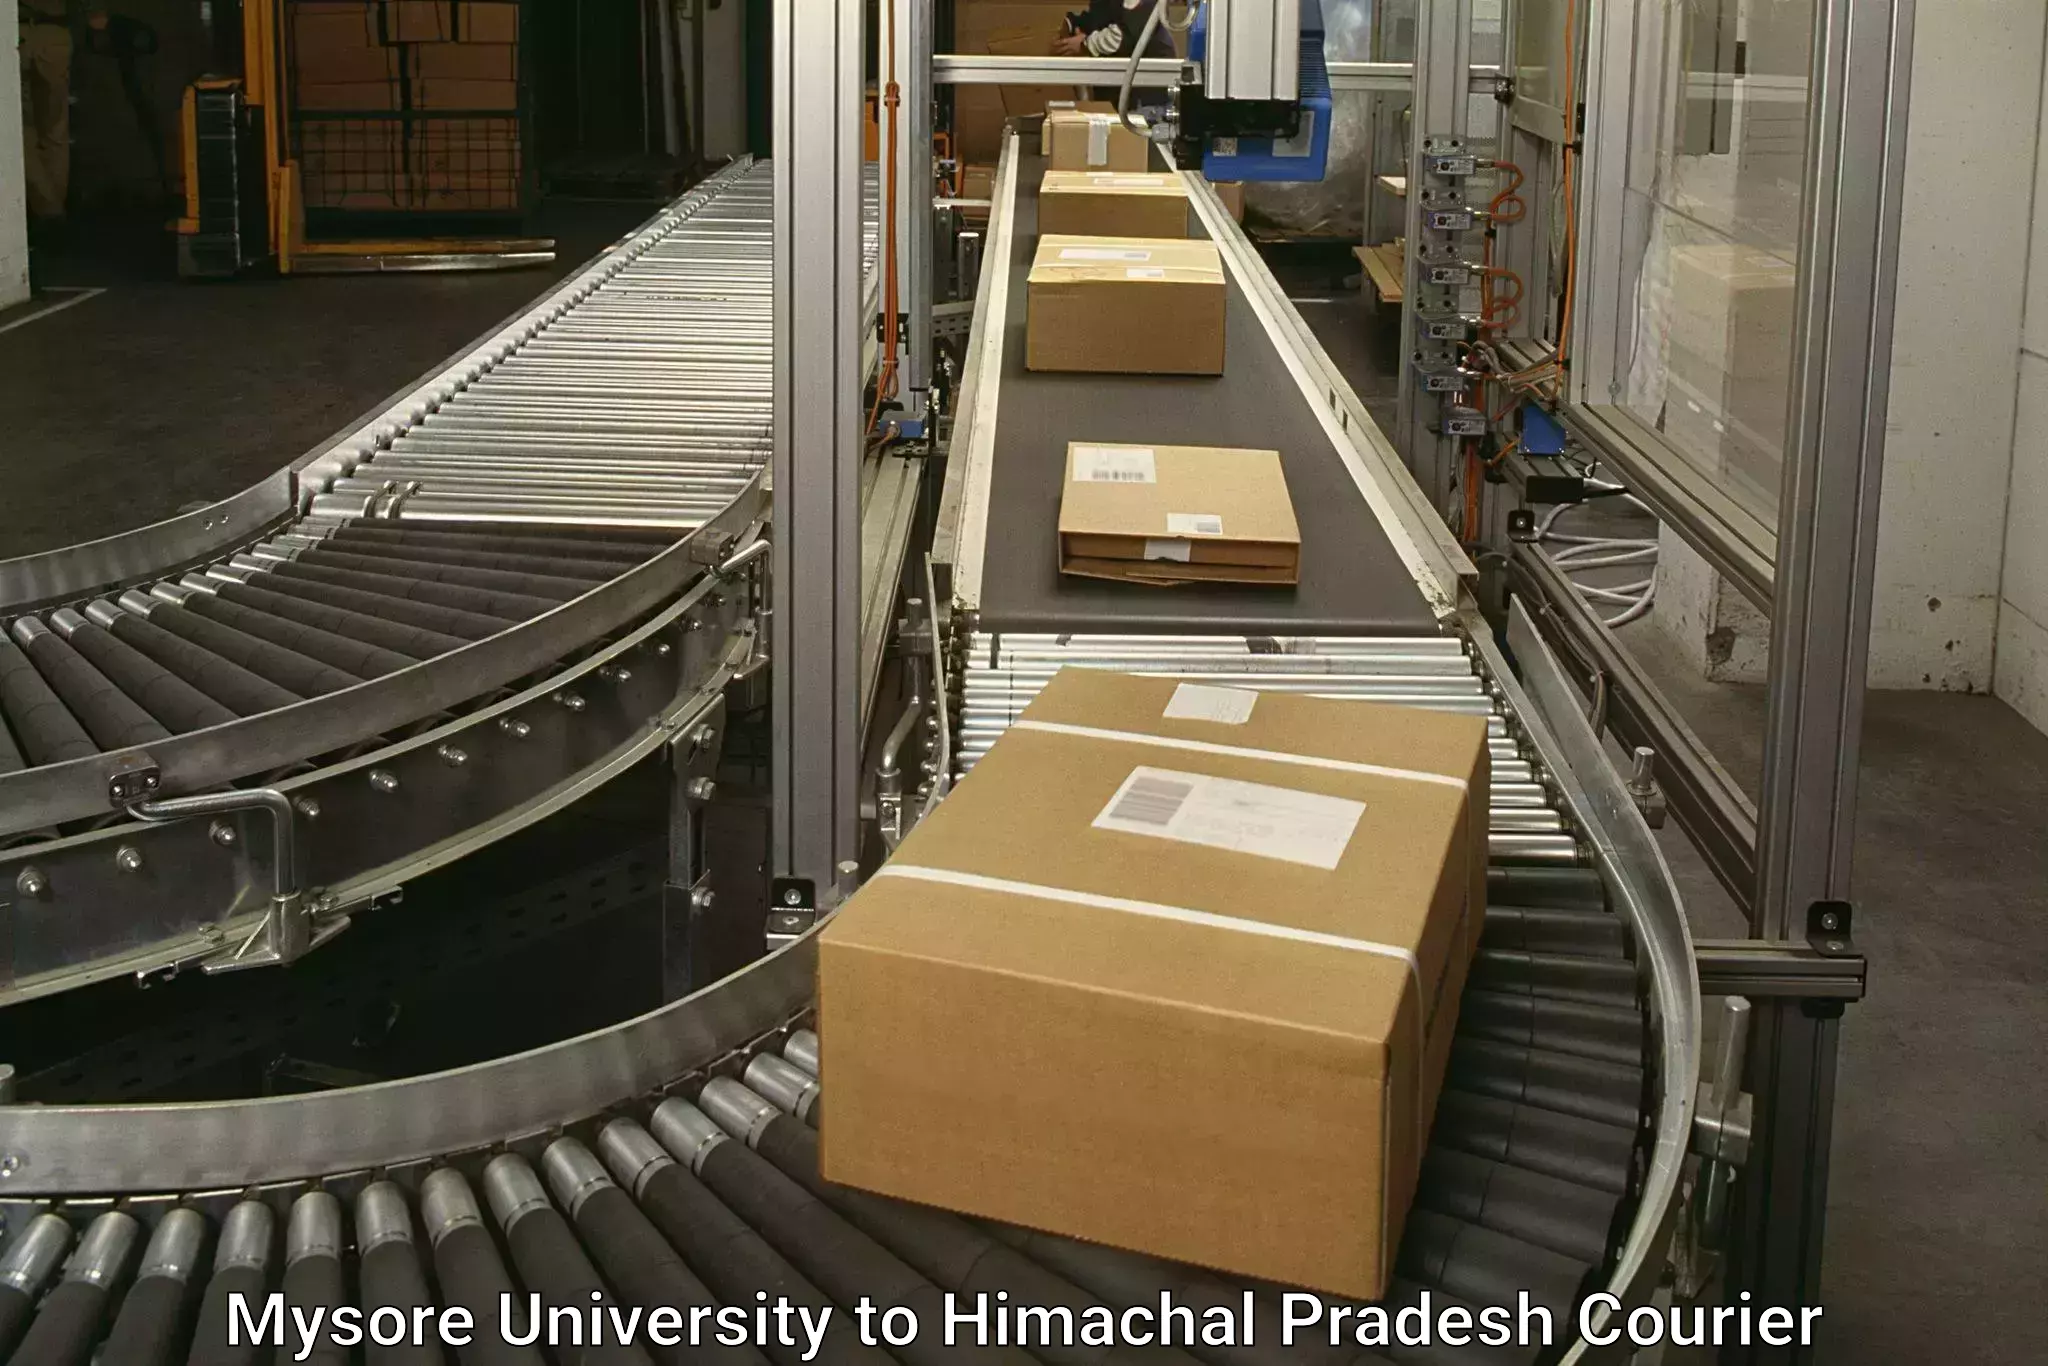 Expedited shipping methods Mysore University to YS Parmar University of Horticulture and Forestry Solan